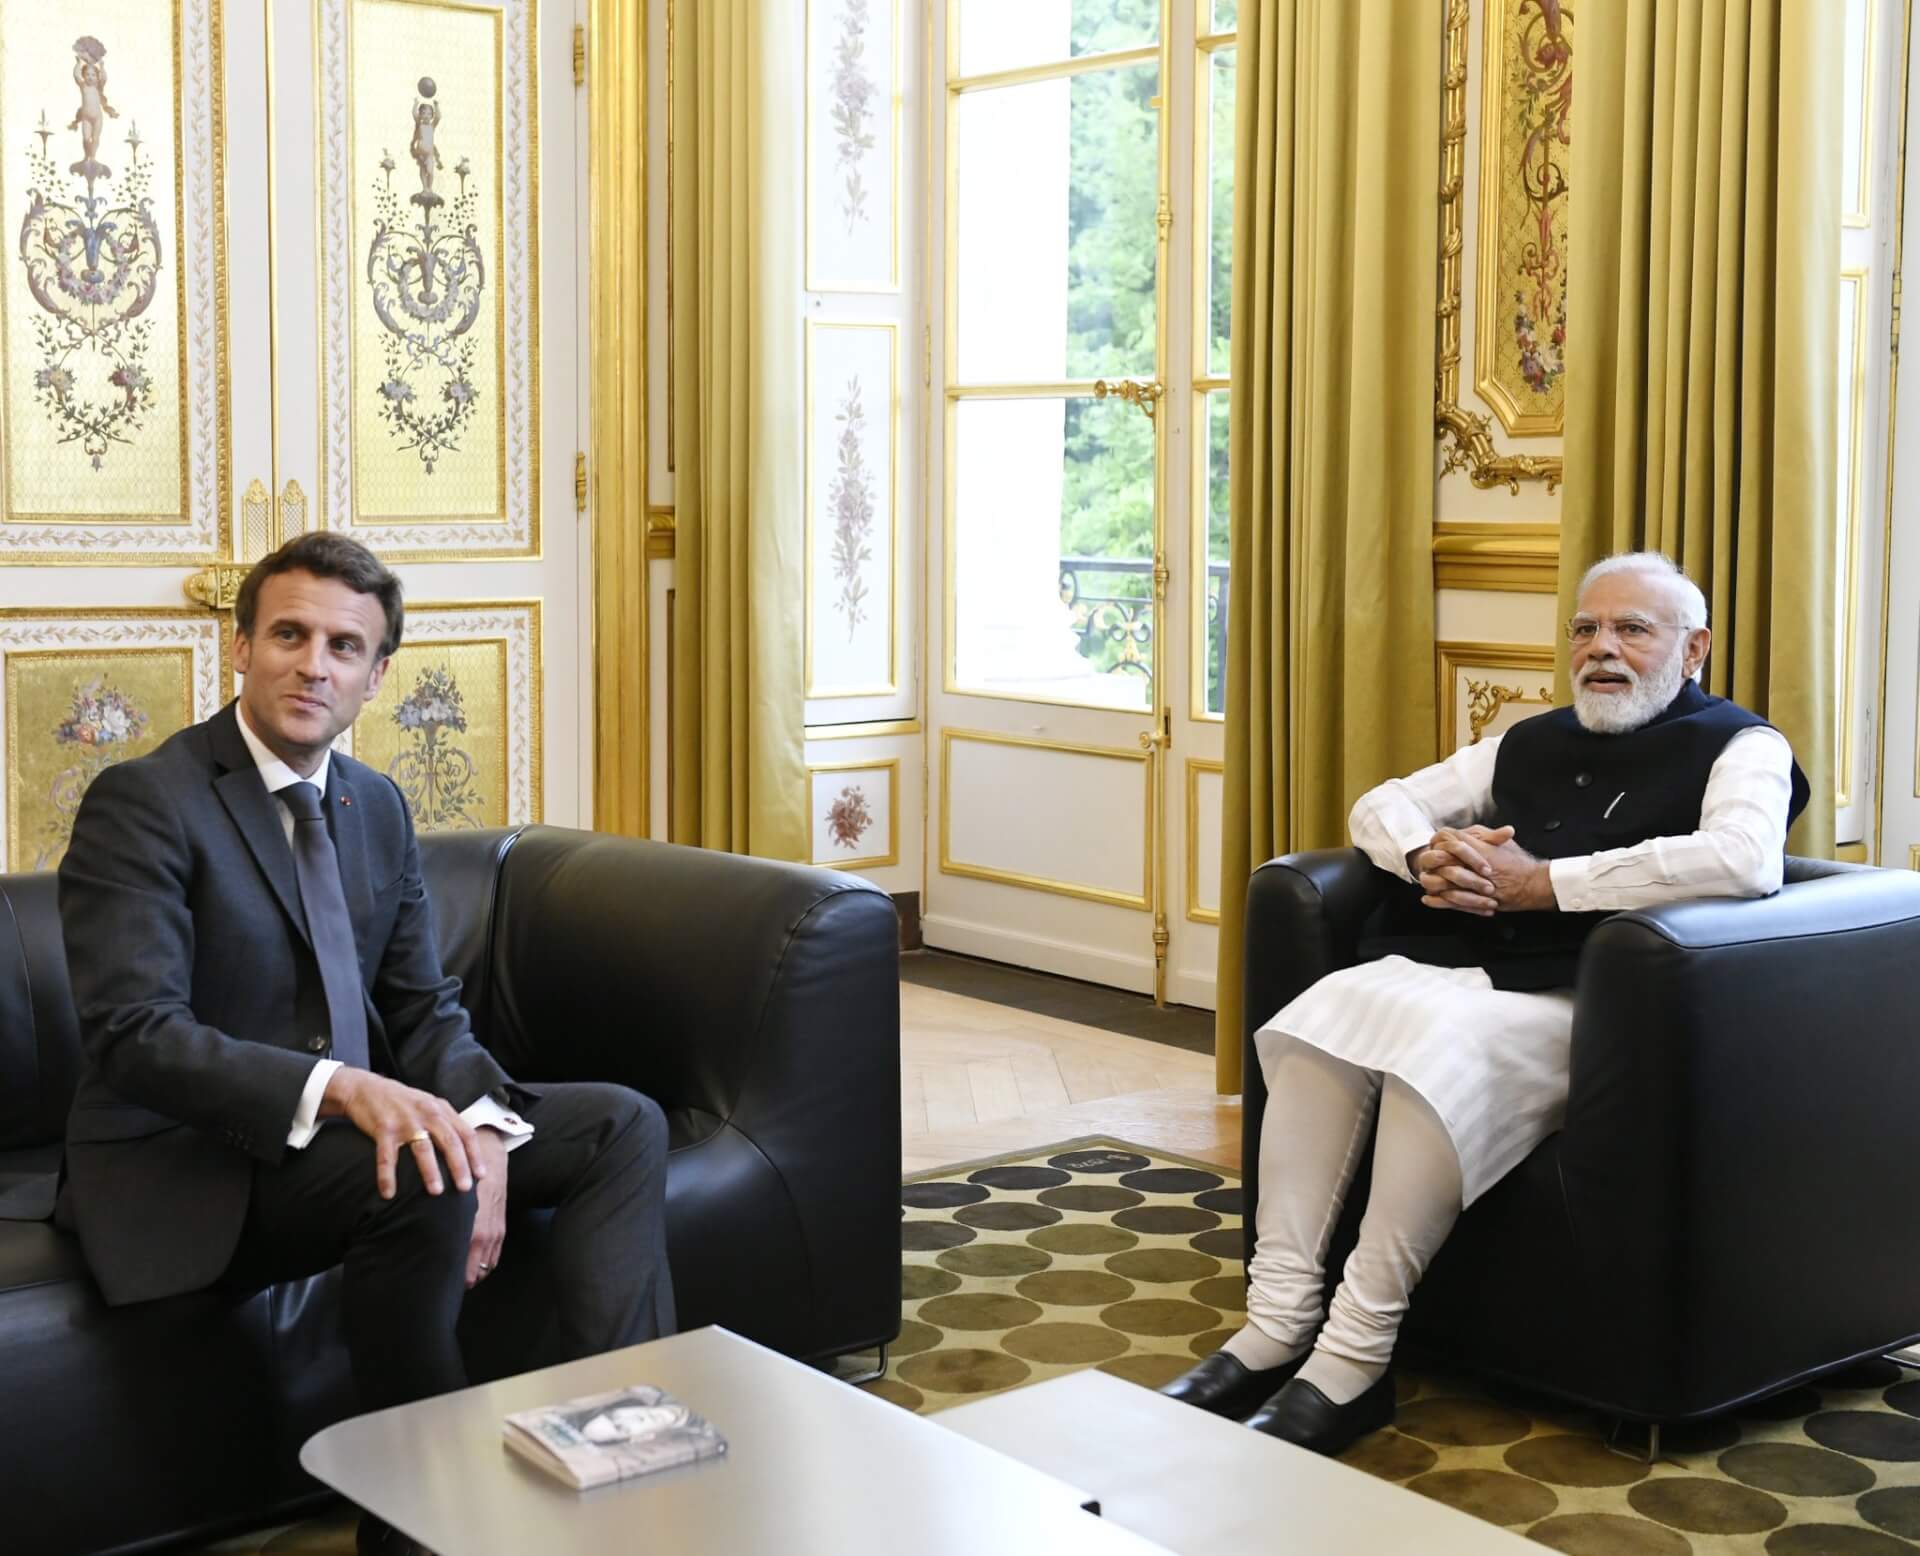 SUMMARY: Indian PM Modi’s Meeting with Leaders of France, Nordic Countries